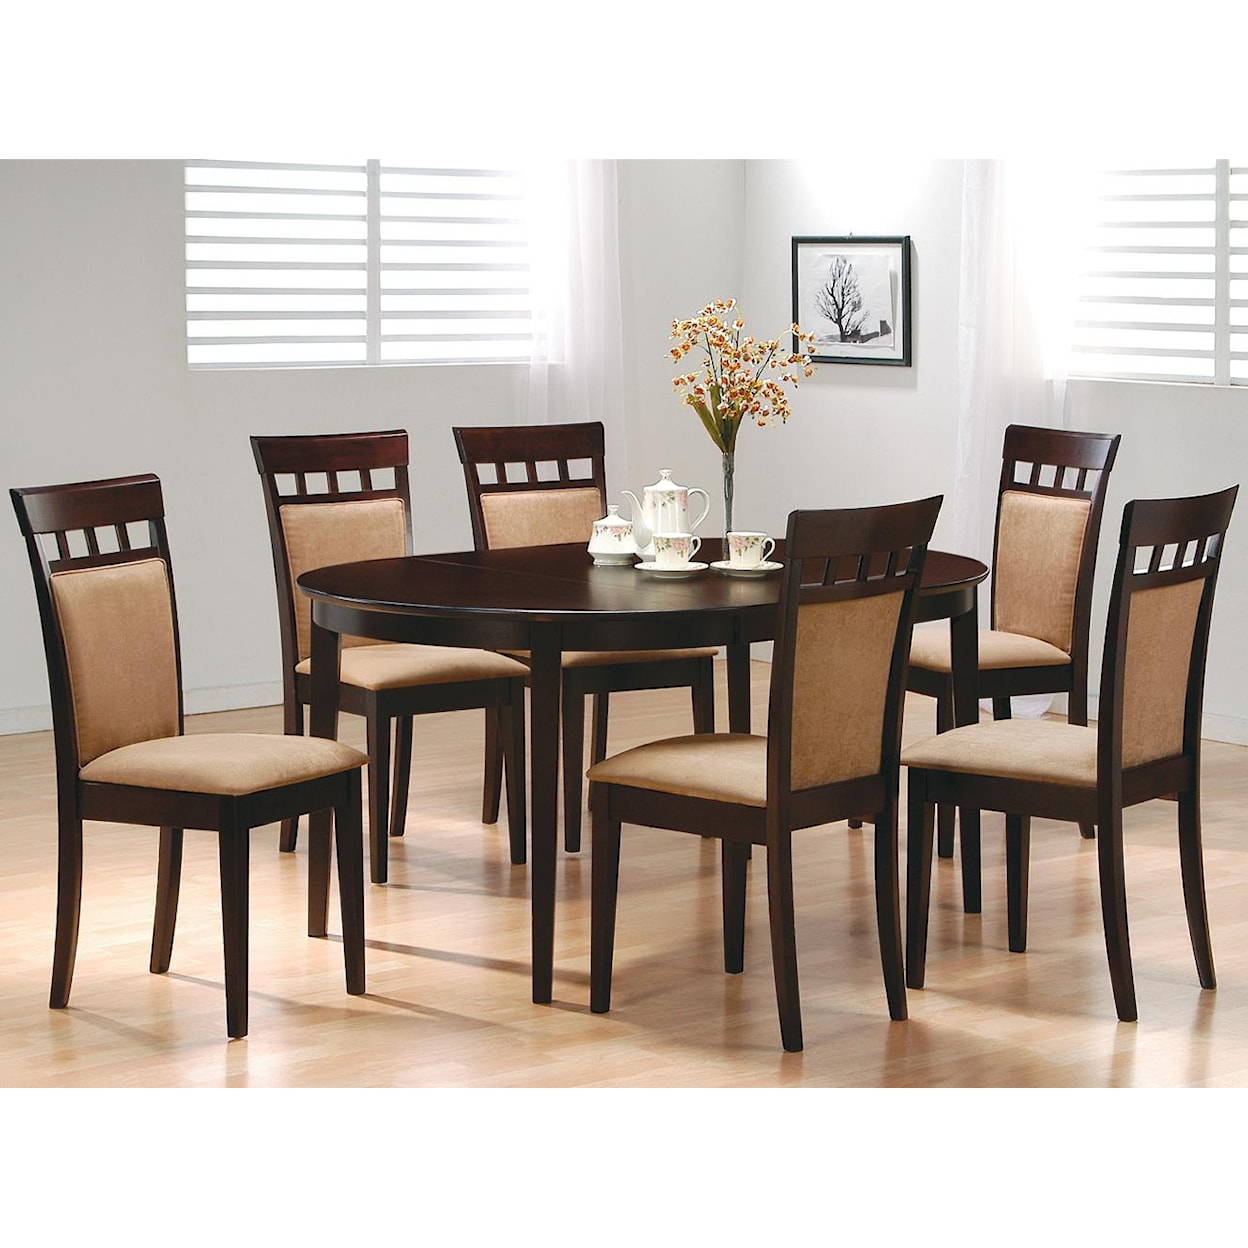 Coaster Mix & Match 7pc Dining Room Group